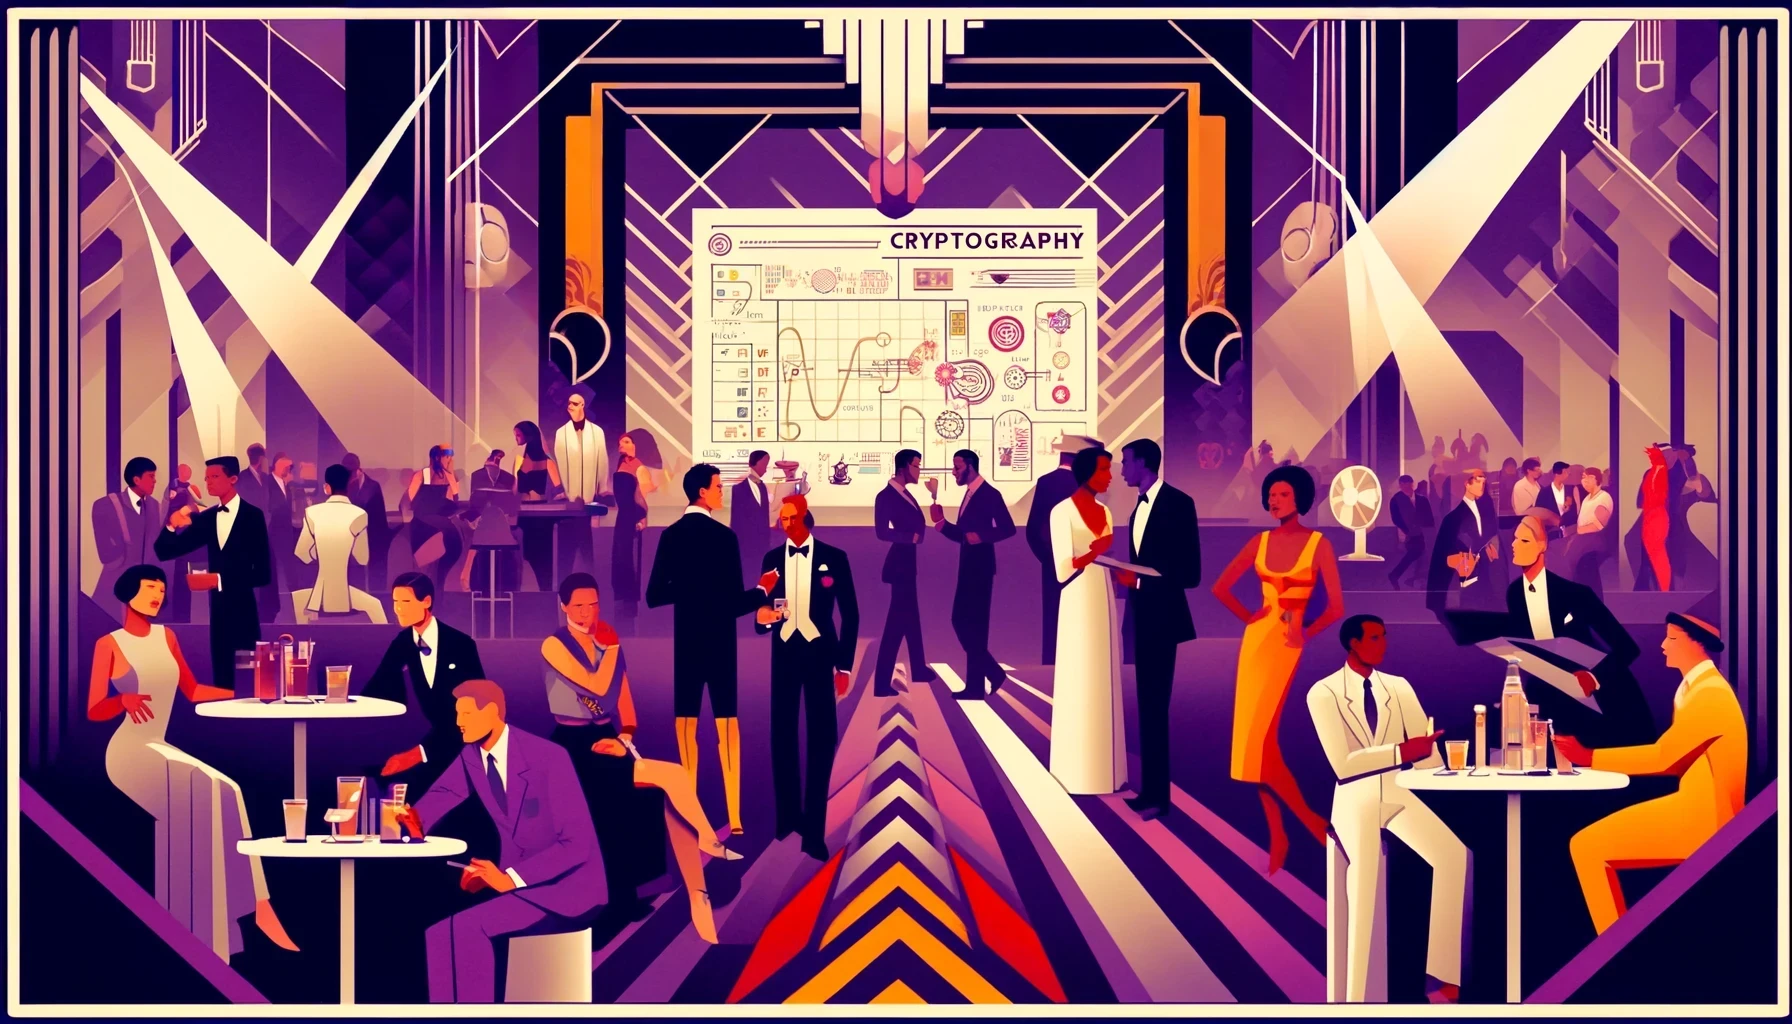 &ldquo;An art deco-style painting inspired by Archibald John Motley Jr.&rsquo;s &lsquo;Nightlife&rsquo;, featuring a diverse group of people discussing cryptography&rdquo; by DALL-E 3.